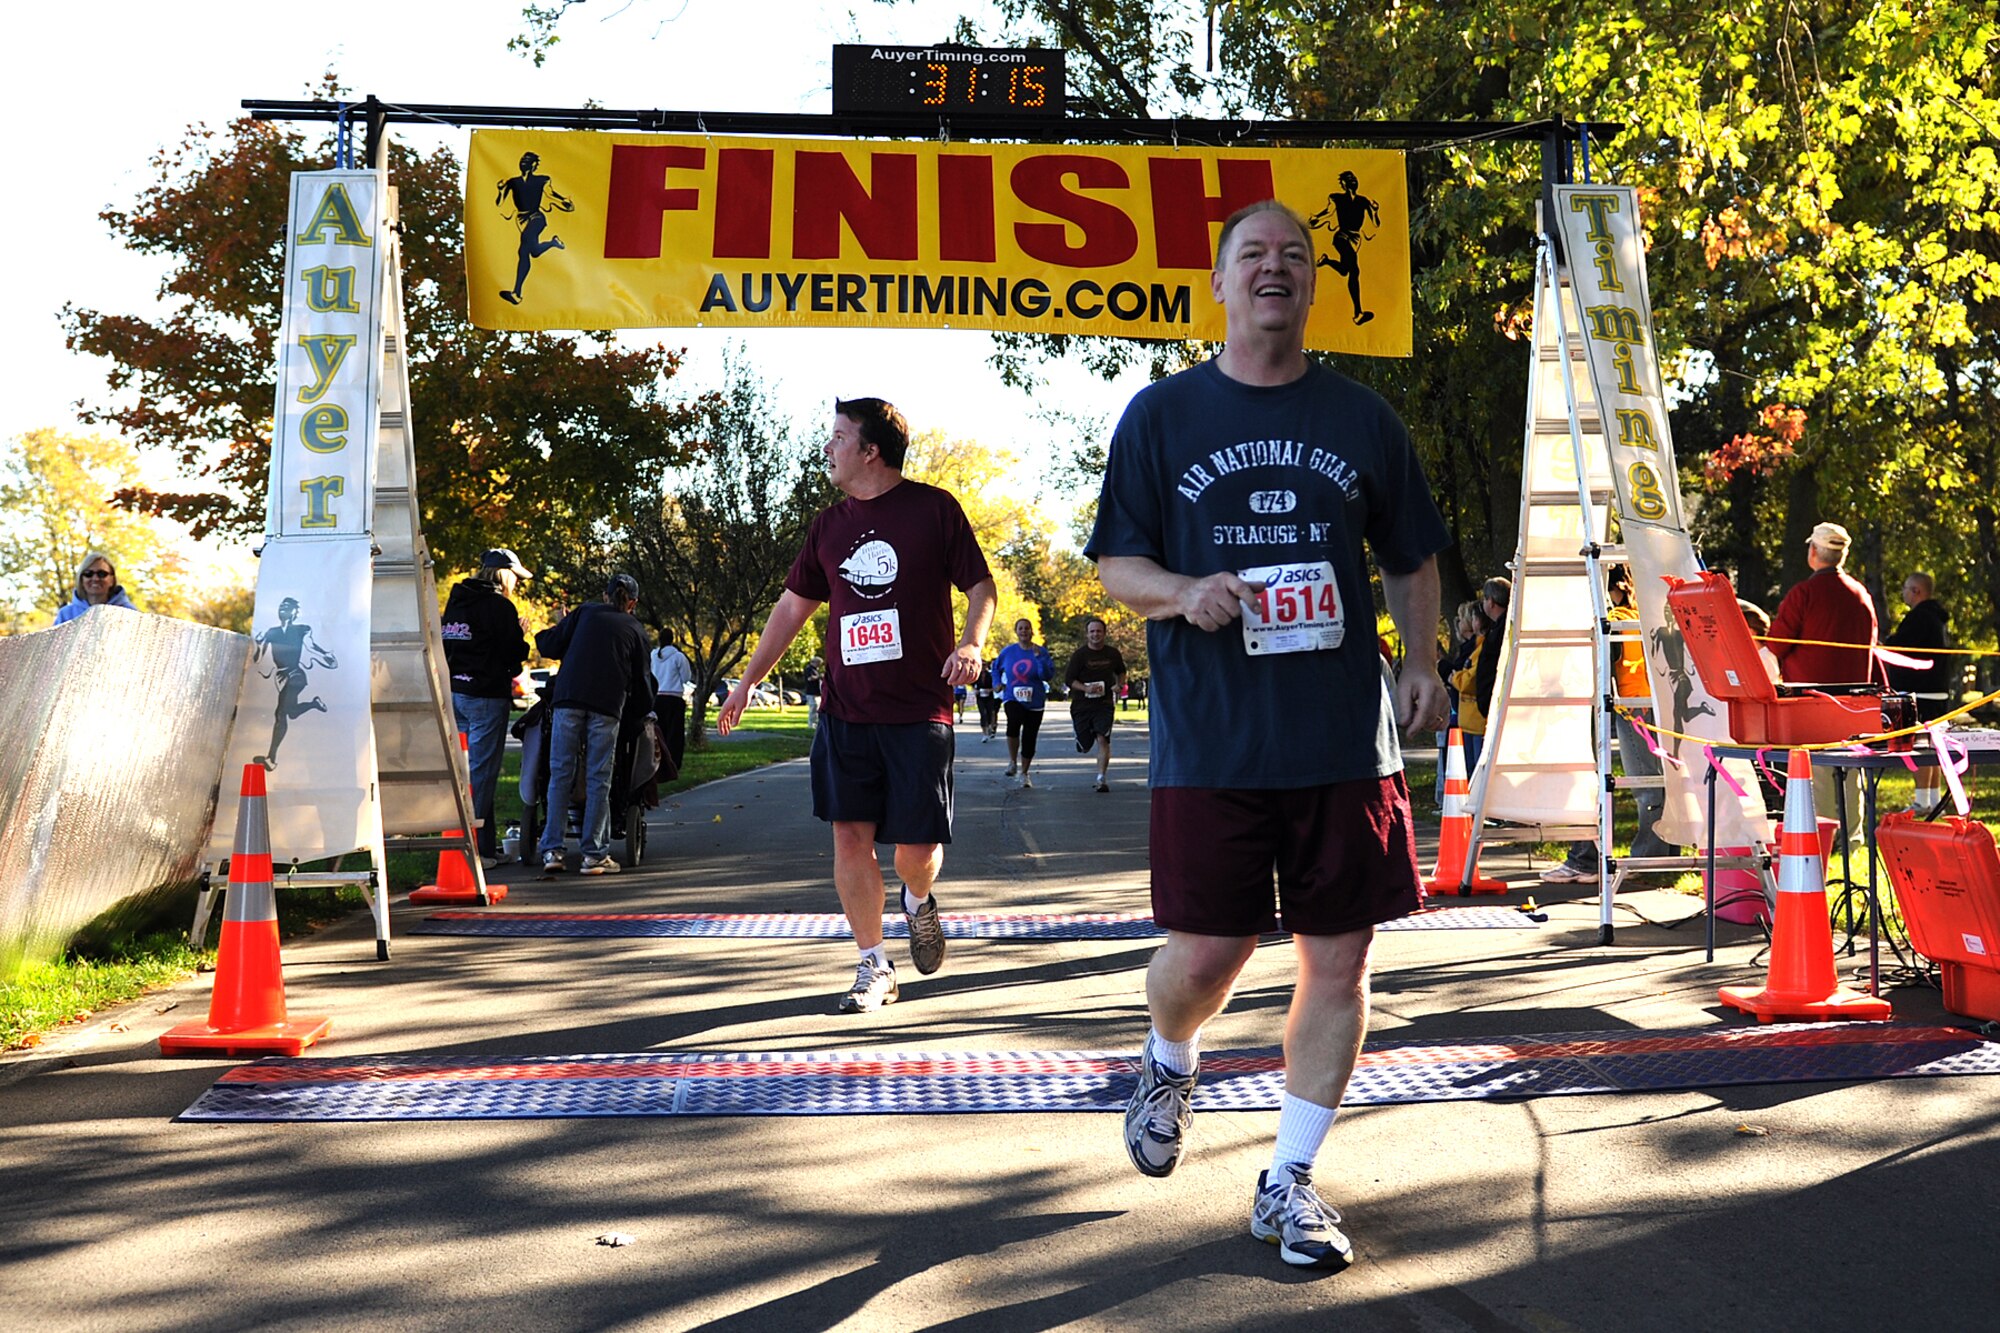 174th Fighter Wing (FW) Commander Col. Kevin Bradley crosses the finish line during the 1st Annual Hancock Field Family Readiness Program 5K Run. Col. Bradley was one of more then 200 runners who came out to support the 174th FW Family Readiness Program. Col. Bradley said, "We're here to support the Family Readiness Program, because the families play as big a supportive role in our mission as the unit members do. Our members couldn't do their jobs if it was not for the support of the families.". The run was held on October 9, 2010 at the Willow Bay shelter in Onondaga Lake Park. (USAF Photo by: SSgt. James N. Faso II/Released)


